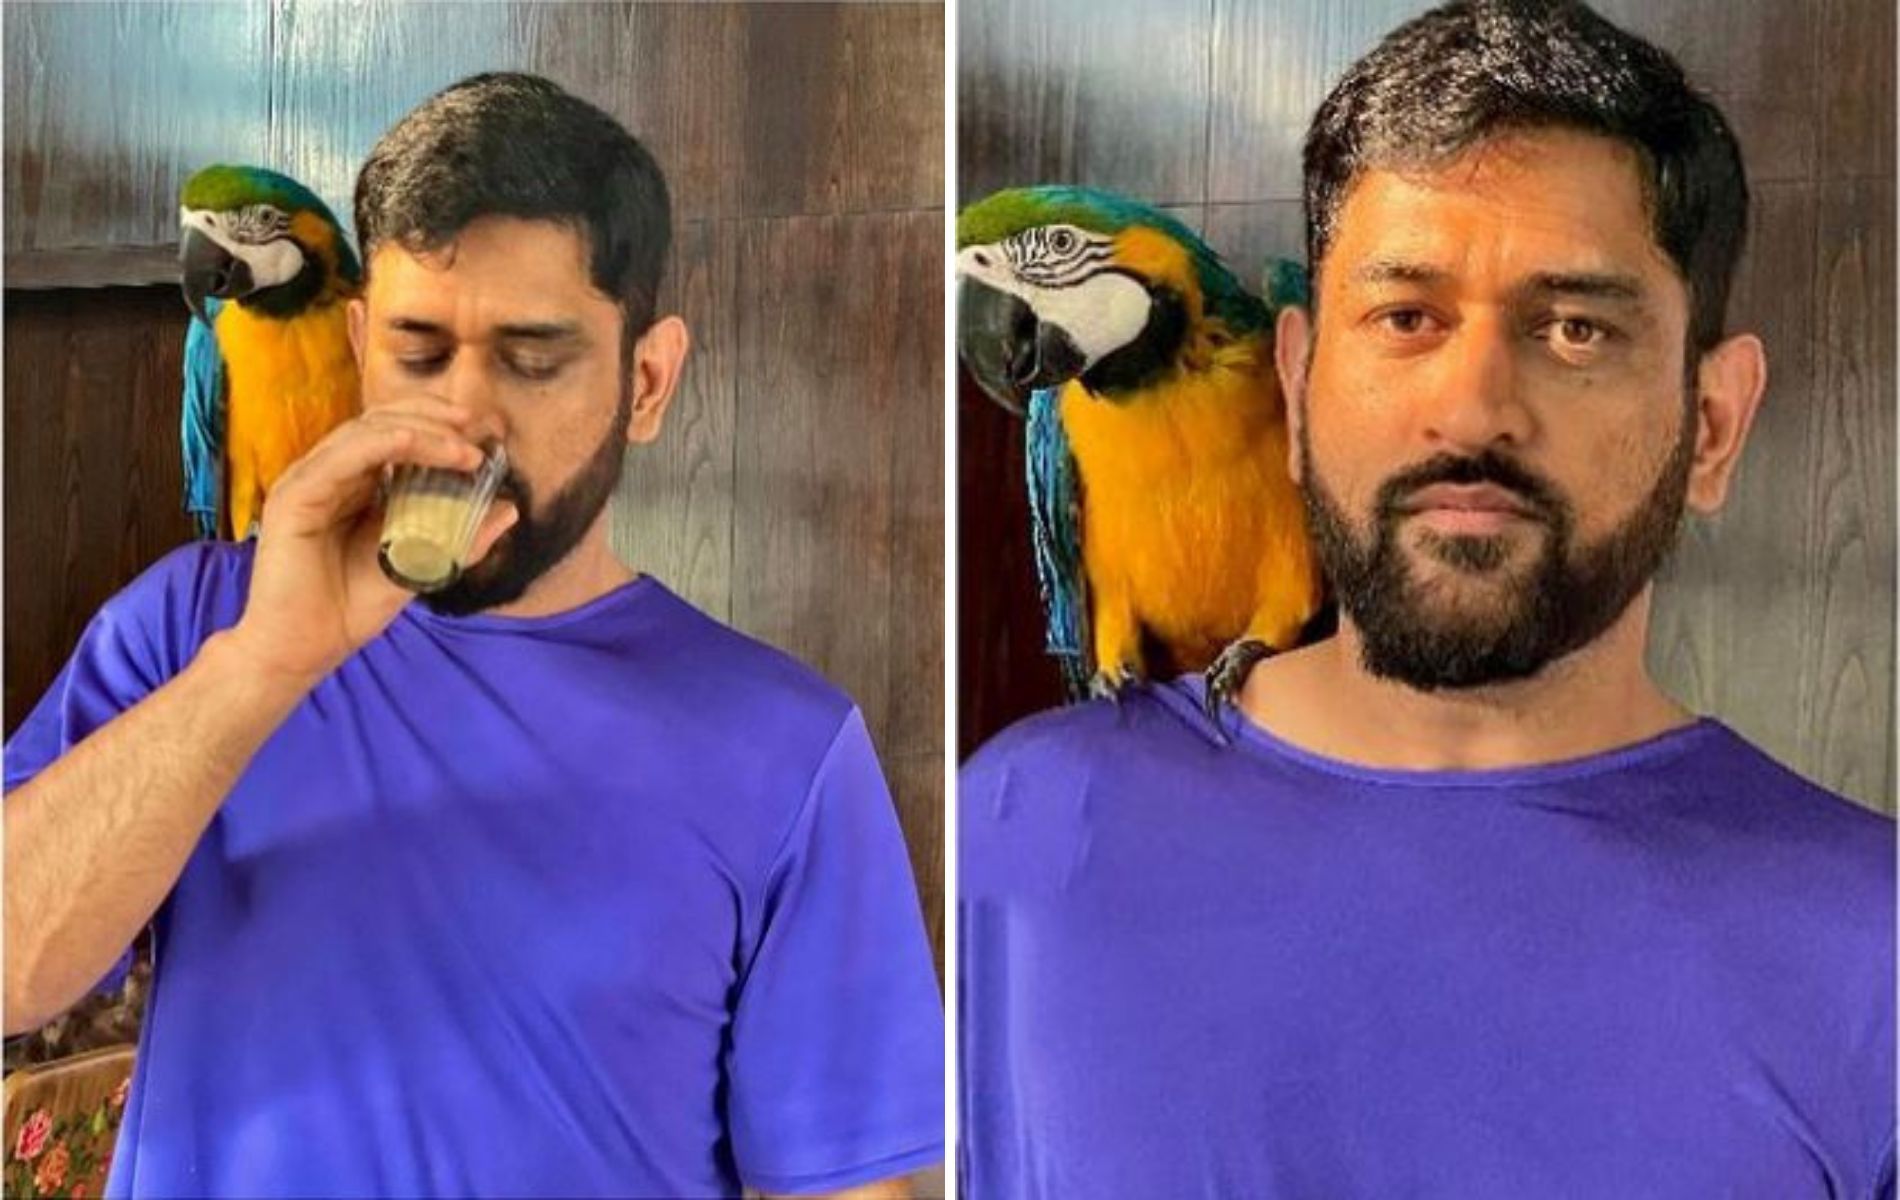 MS Dhoni with his new pet parrot. (Image source: Sakshi Singh Dhoni/Instagram)